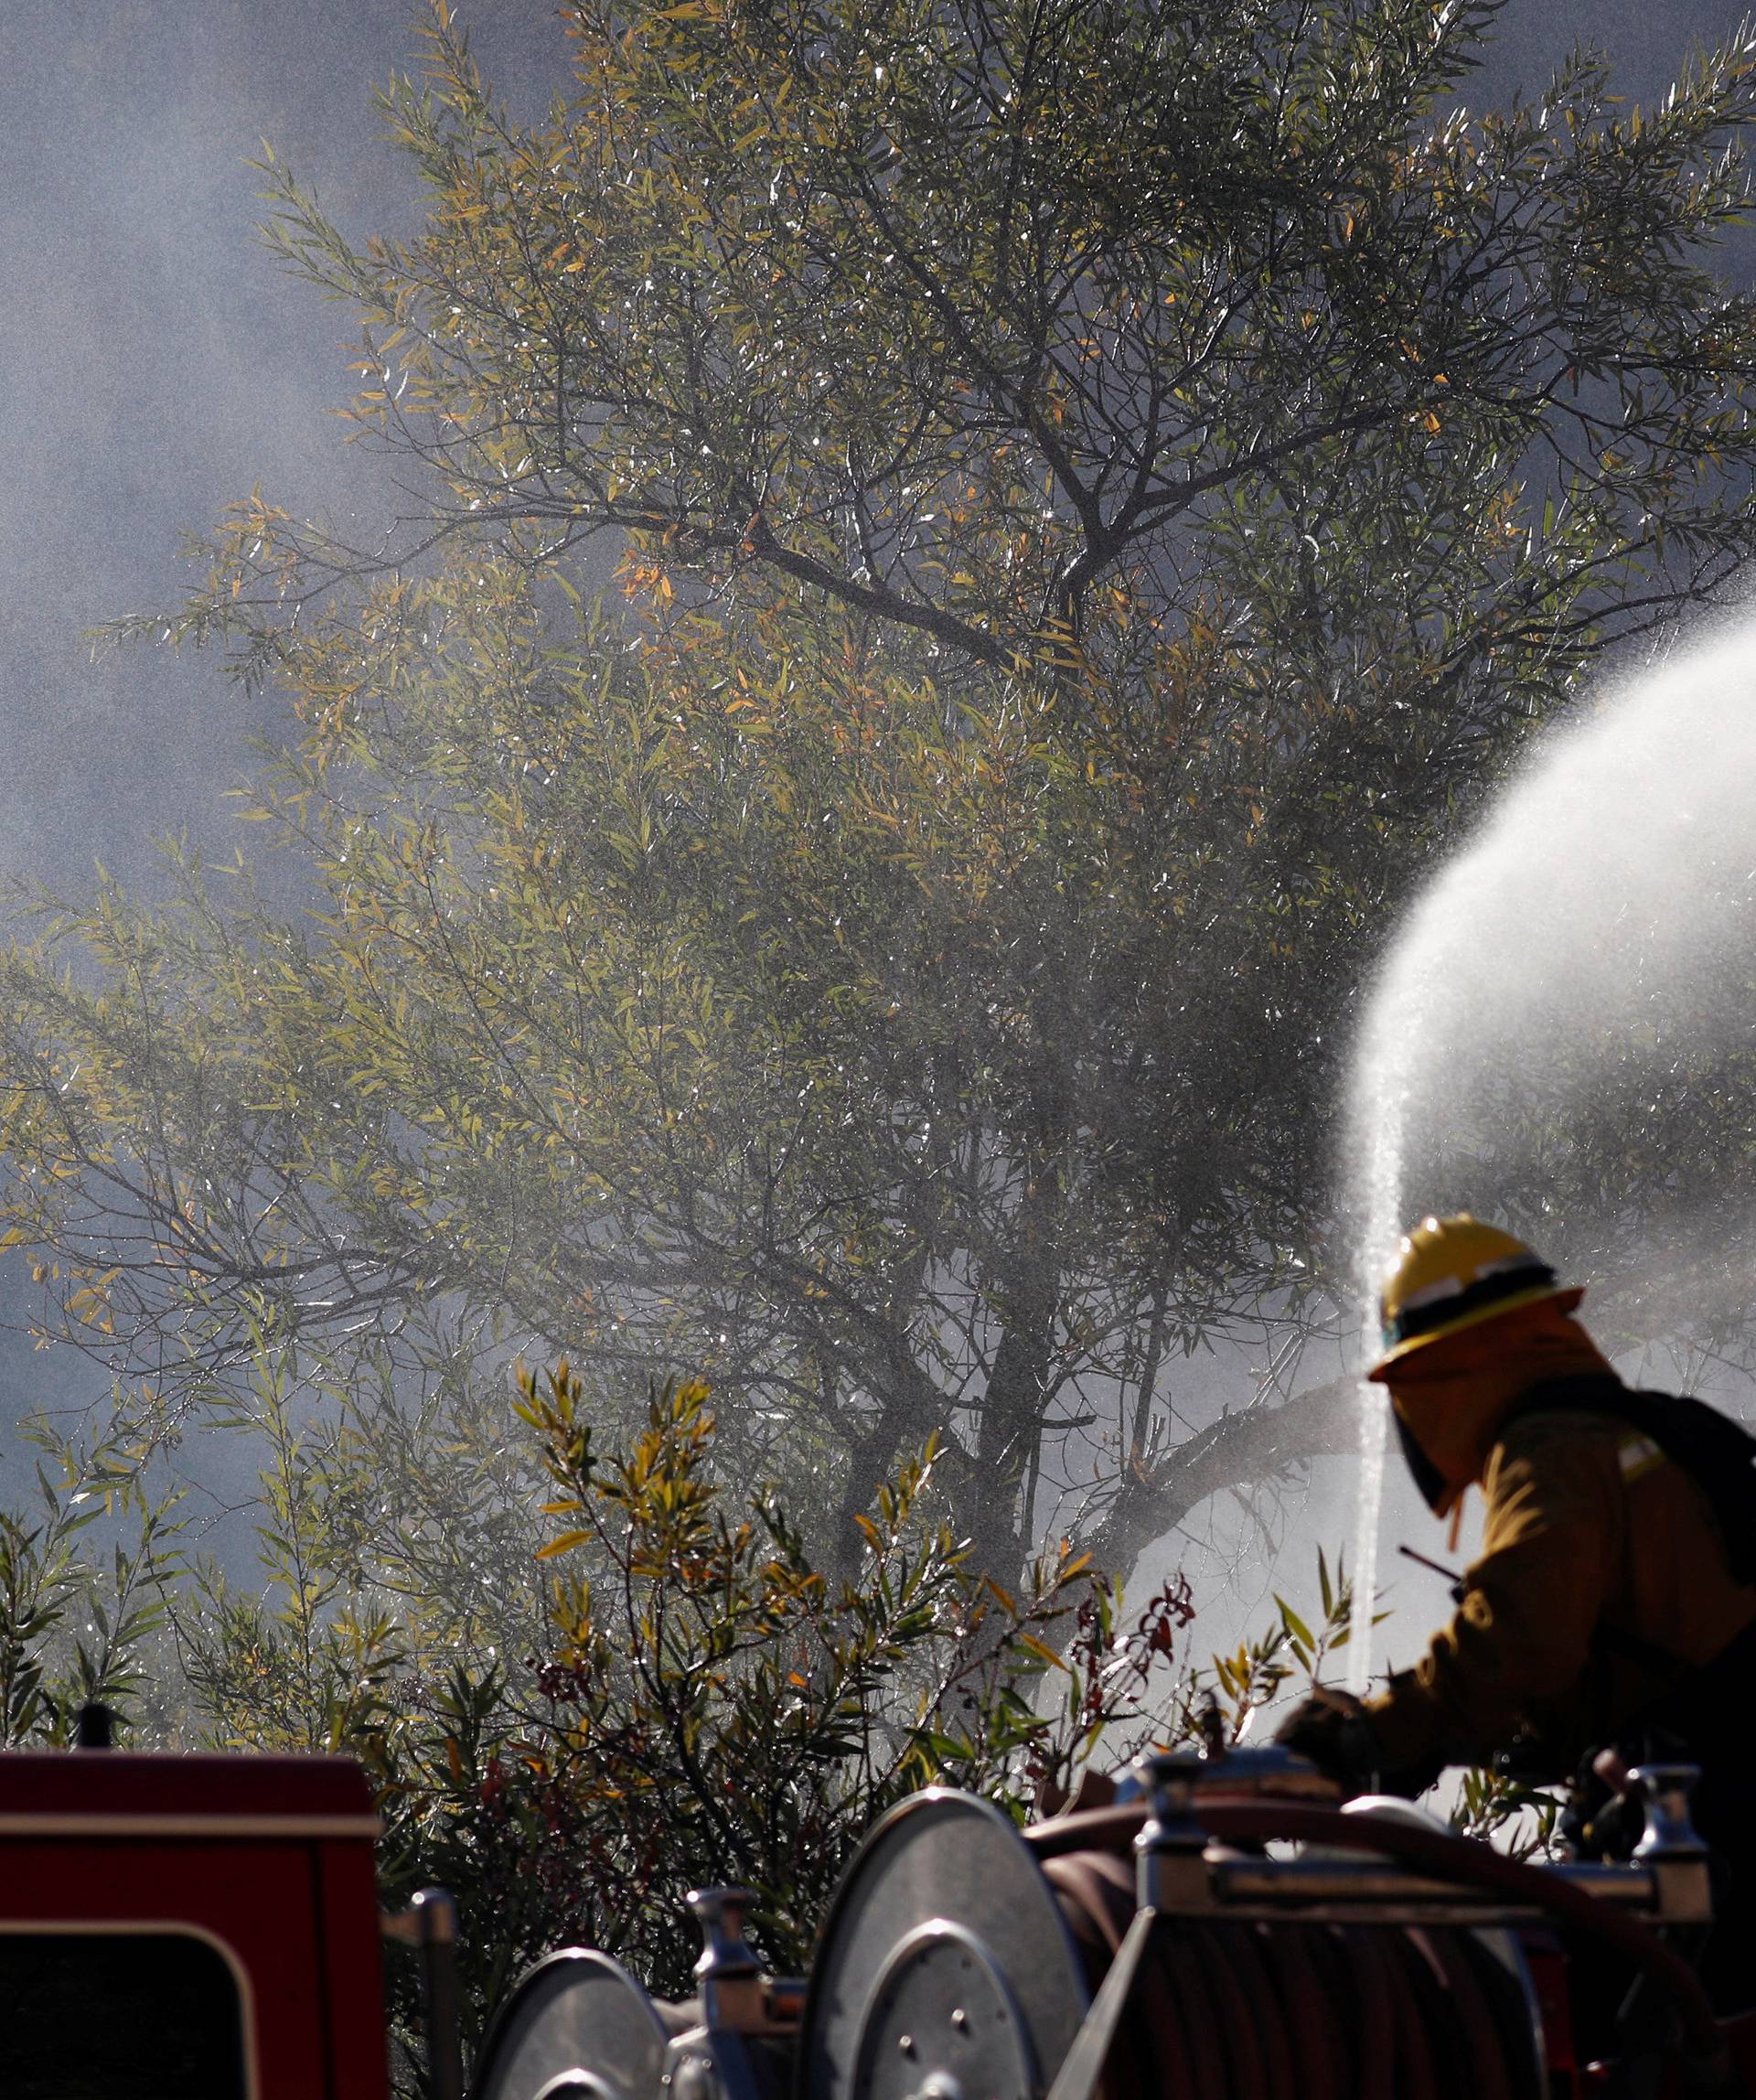 Firefighter sprays water from a hose while smoke is seen, as they battle the Woolsey fire in West Hills, Southern California